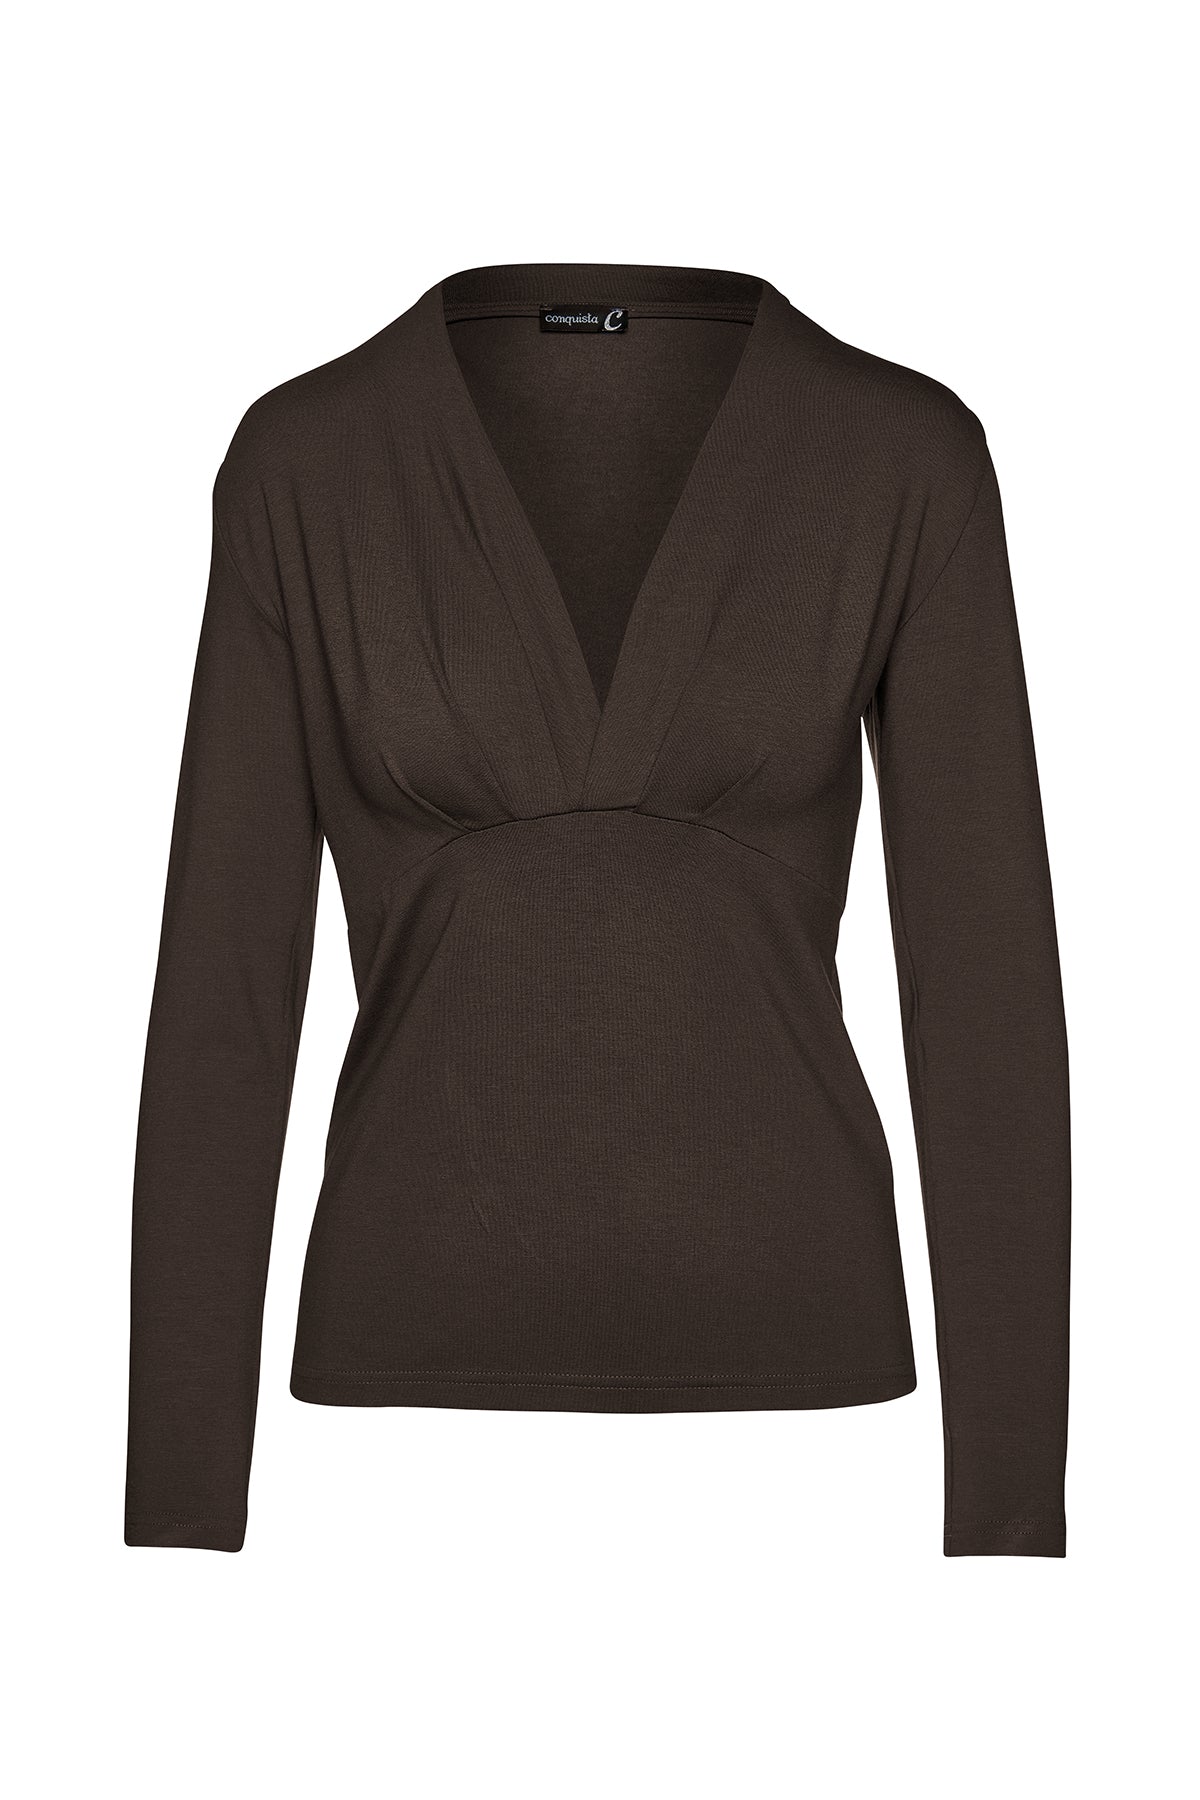 Women’s Brown Long Sleeve Faux Wrap Top In Stretch Jersey Sustainable Fabric Medium Conquista